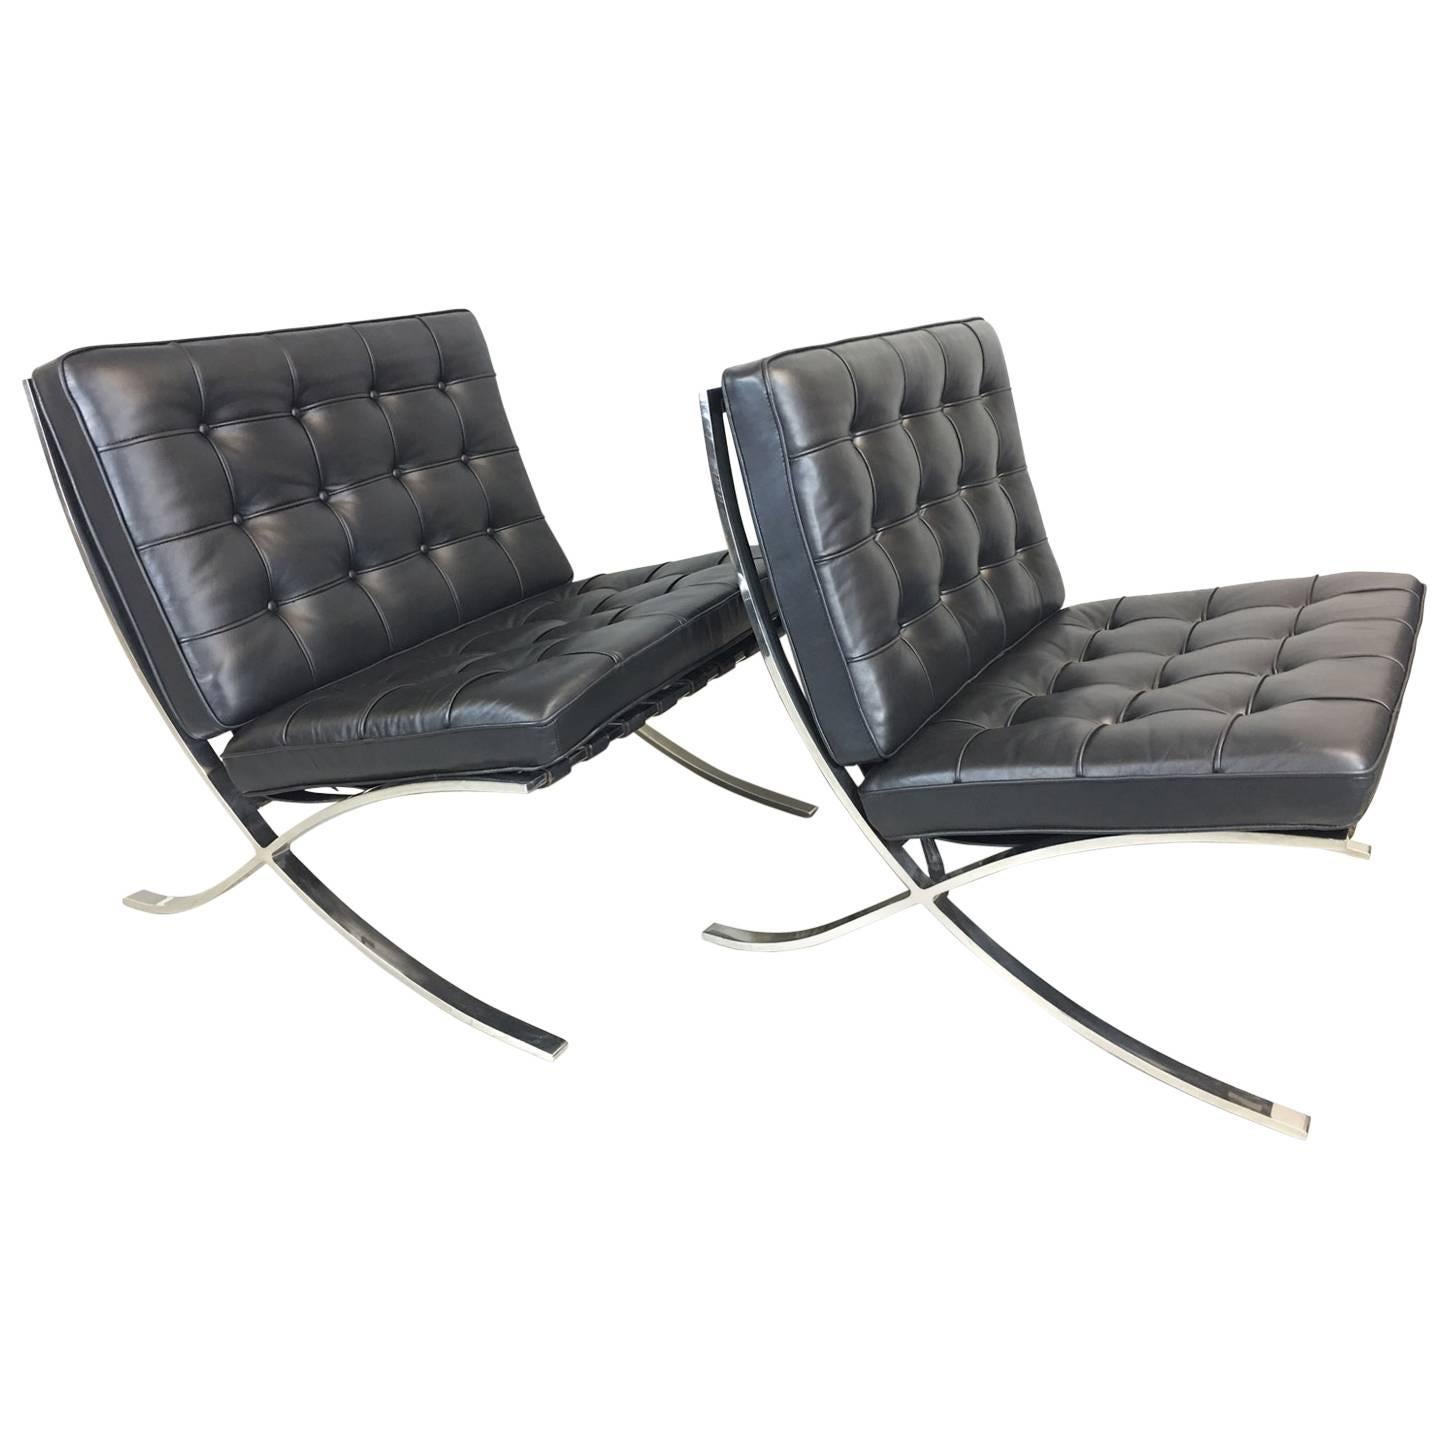 Barcelona Lounge Chair by Mies van der Rohe